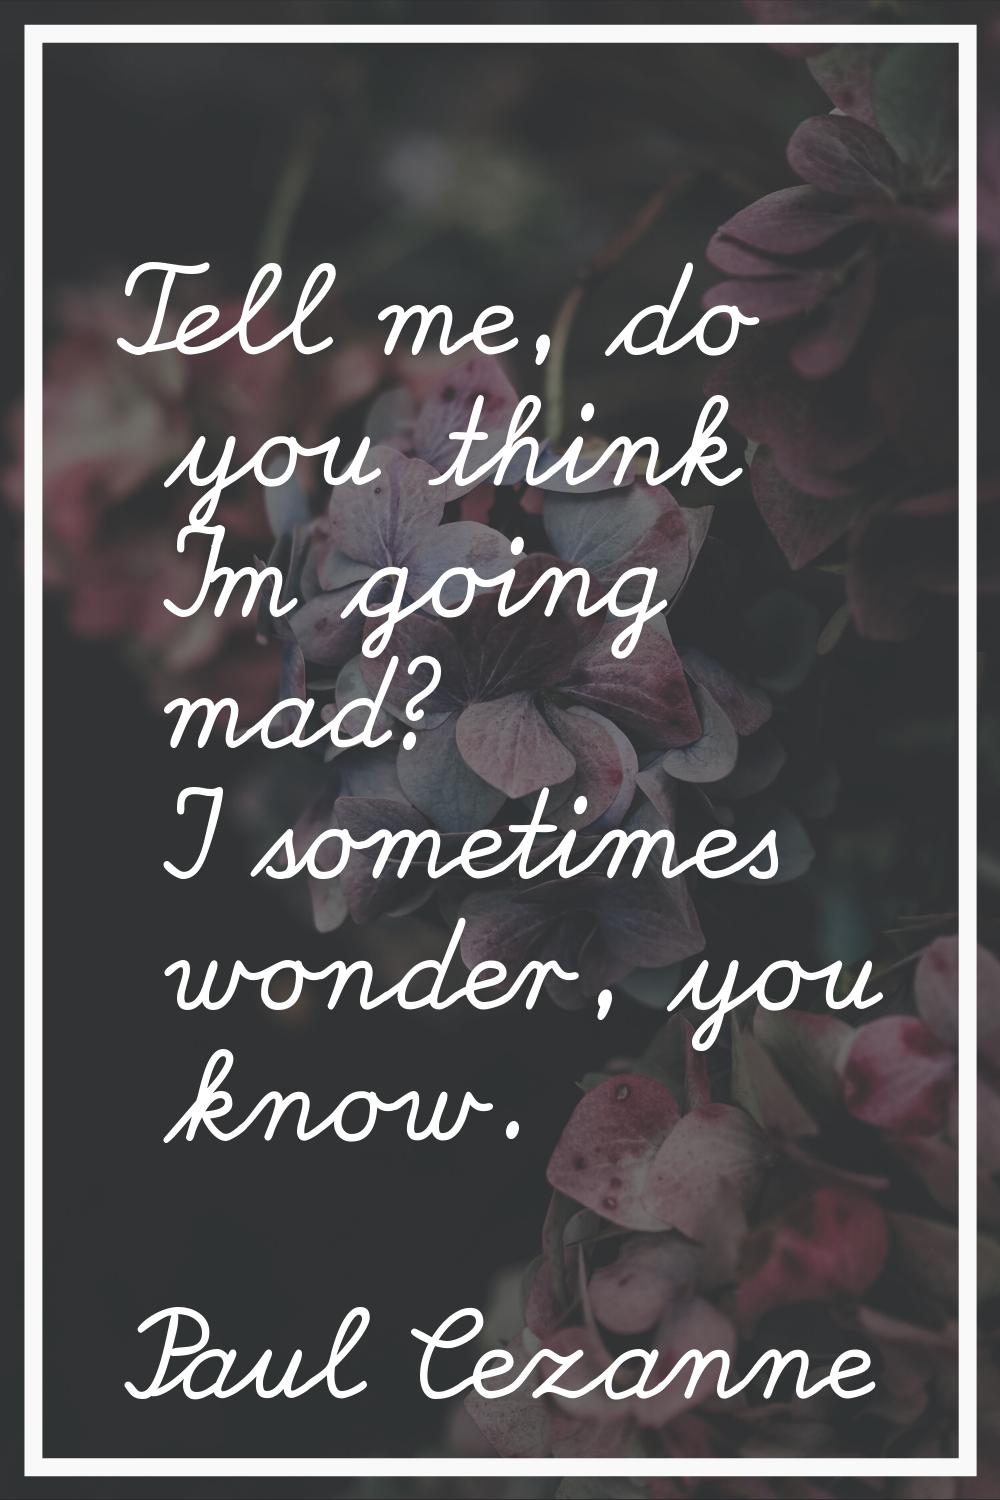 Tell me, do you think I'm going mad? I sometimes wonder, you know.